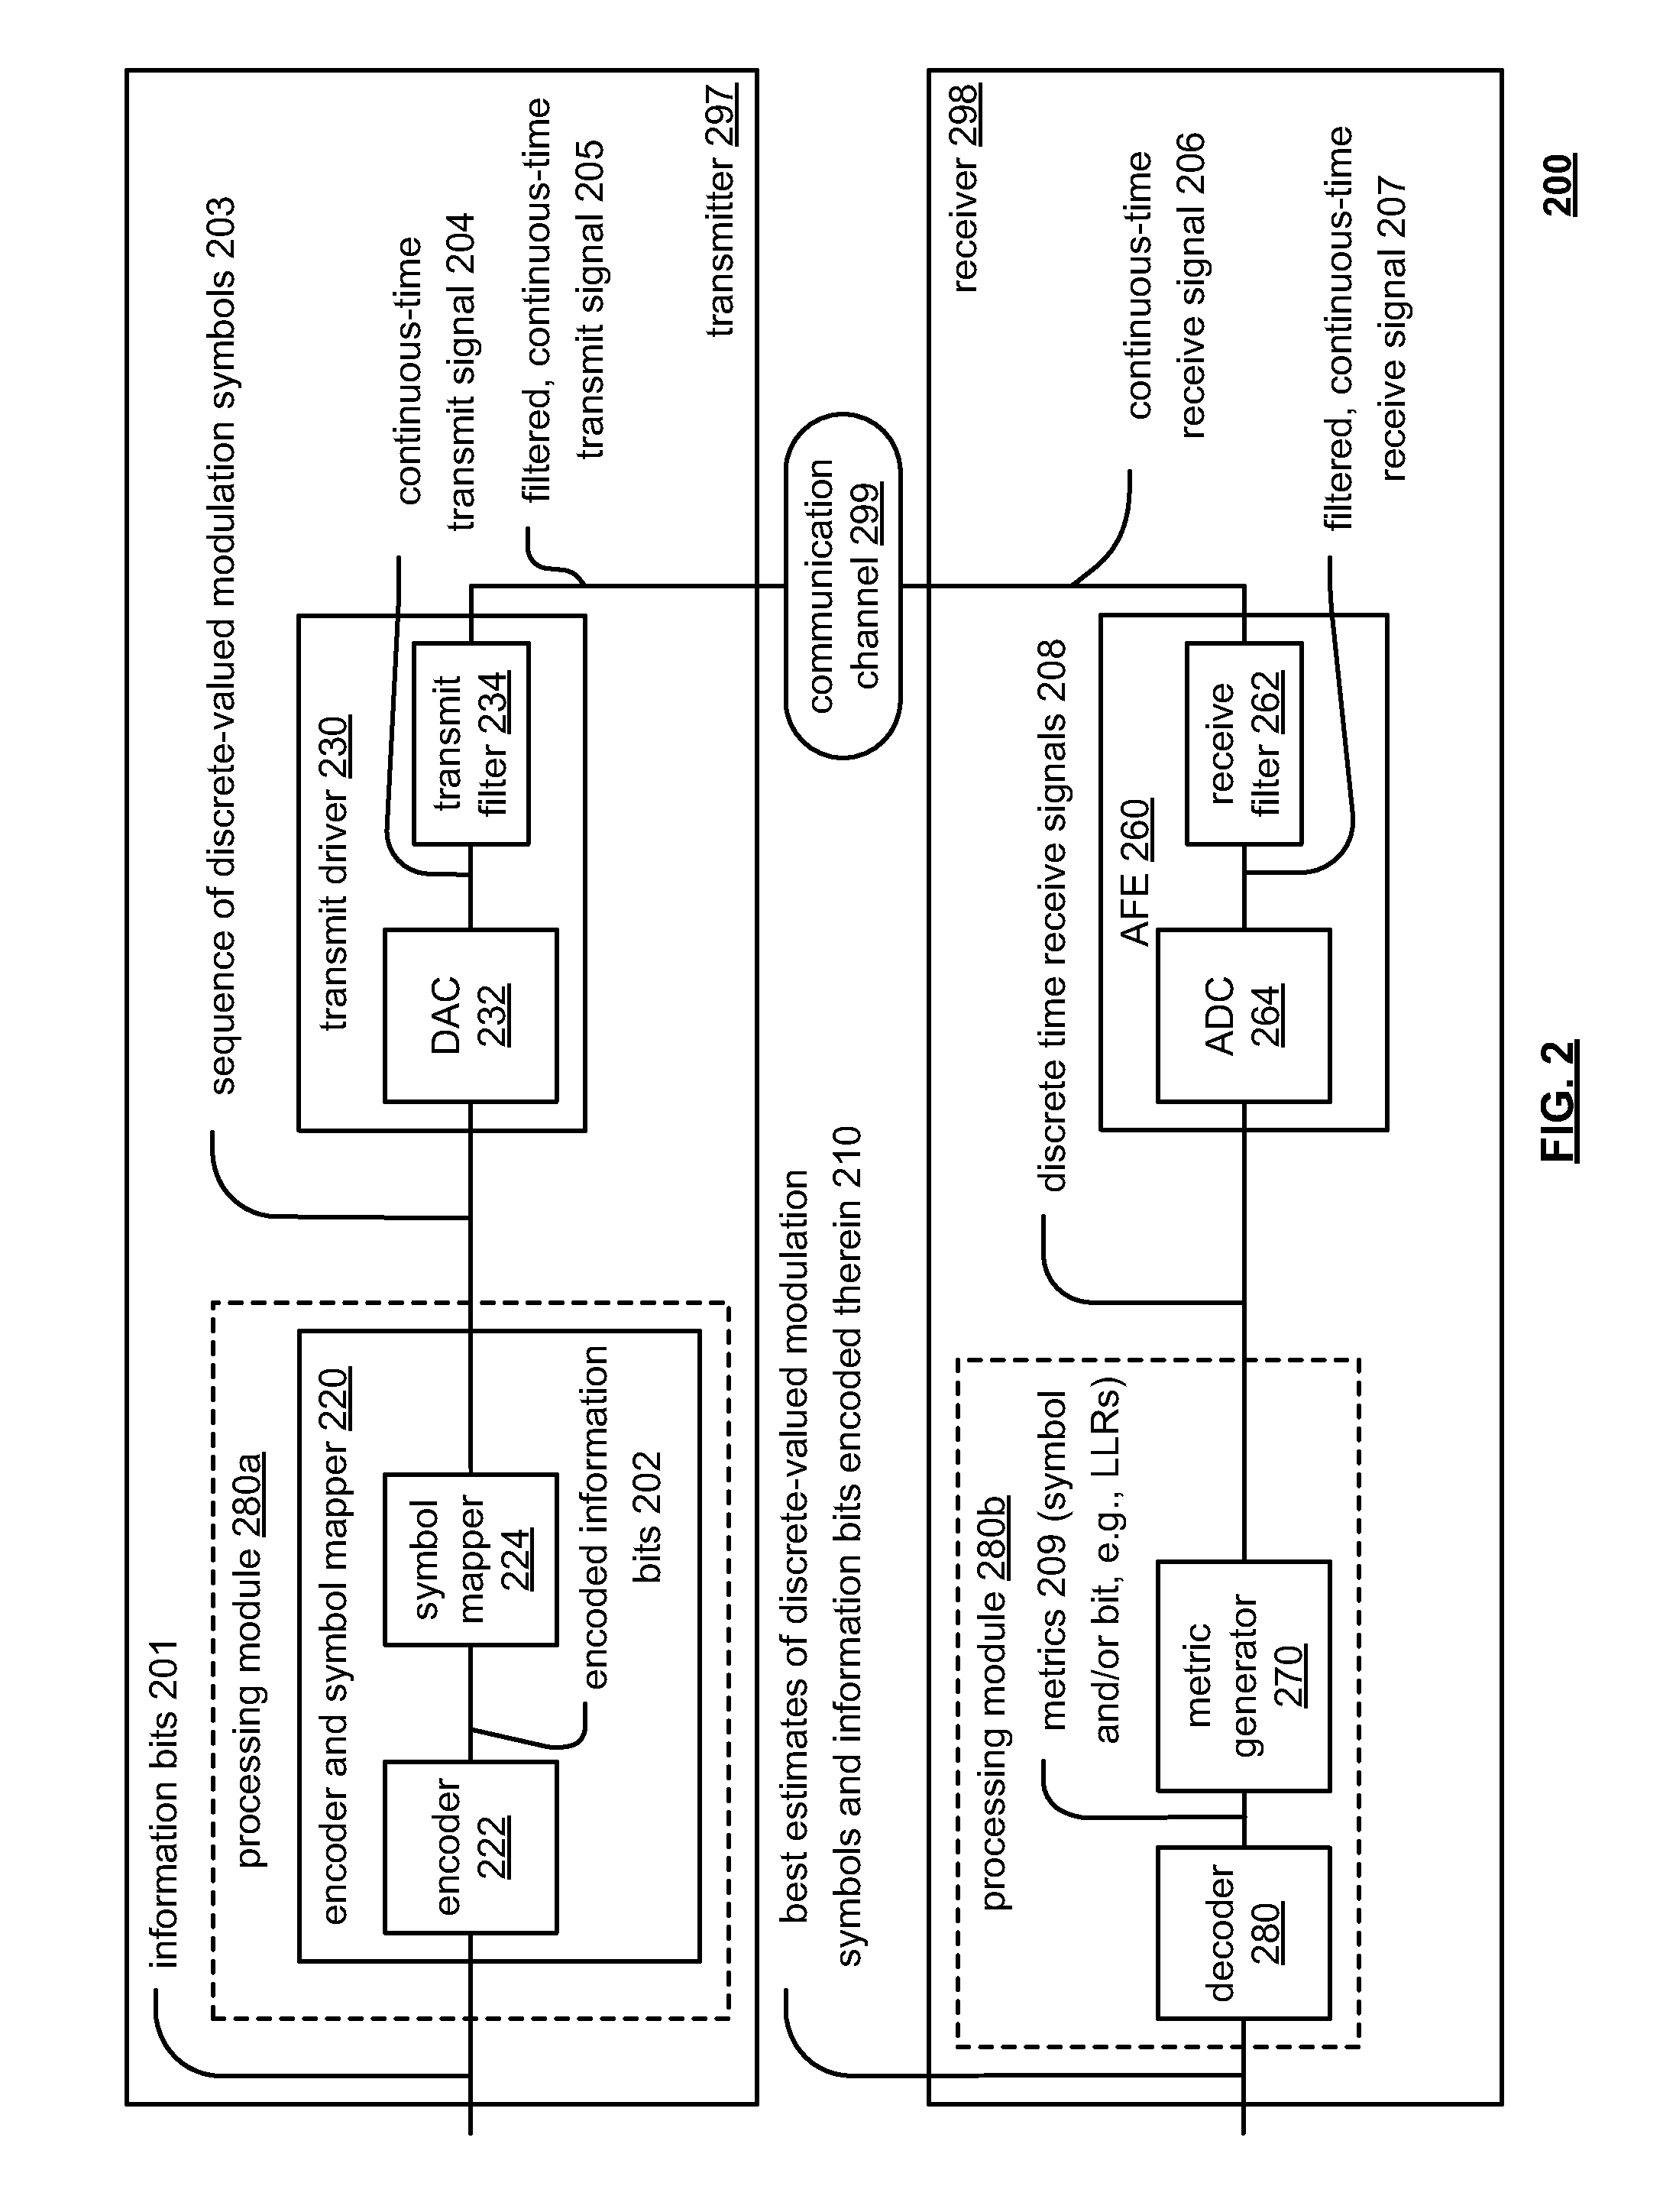 Selective intra and/or inter prediction video encoding